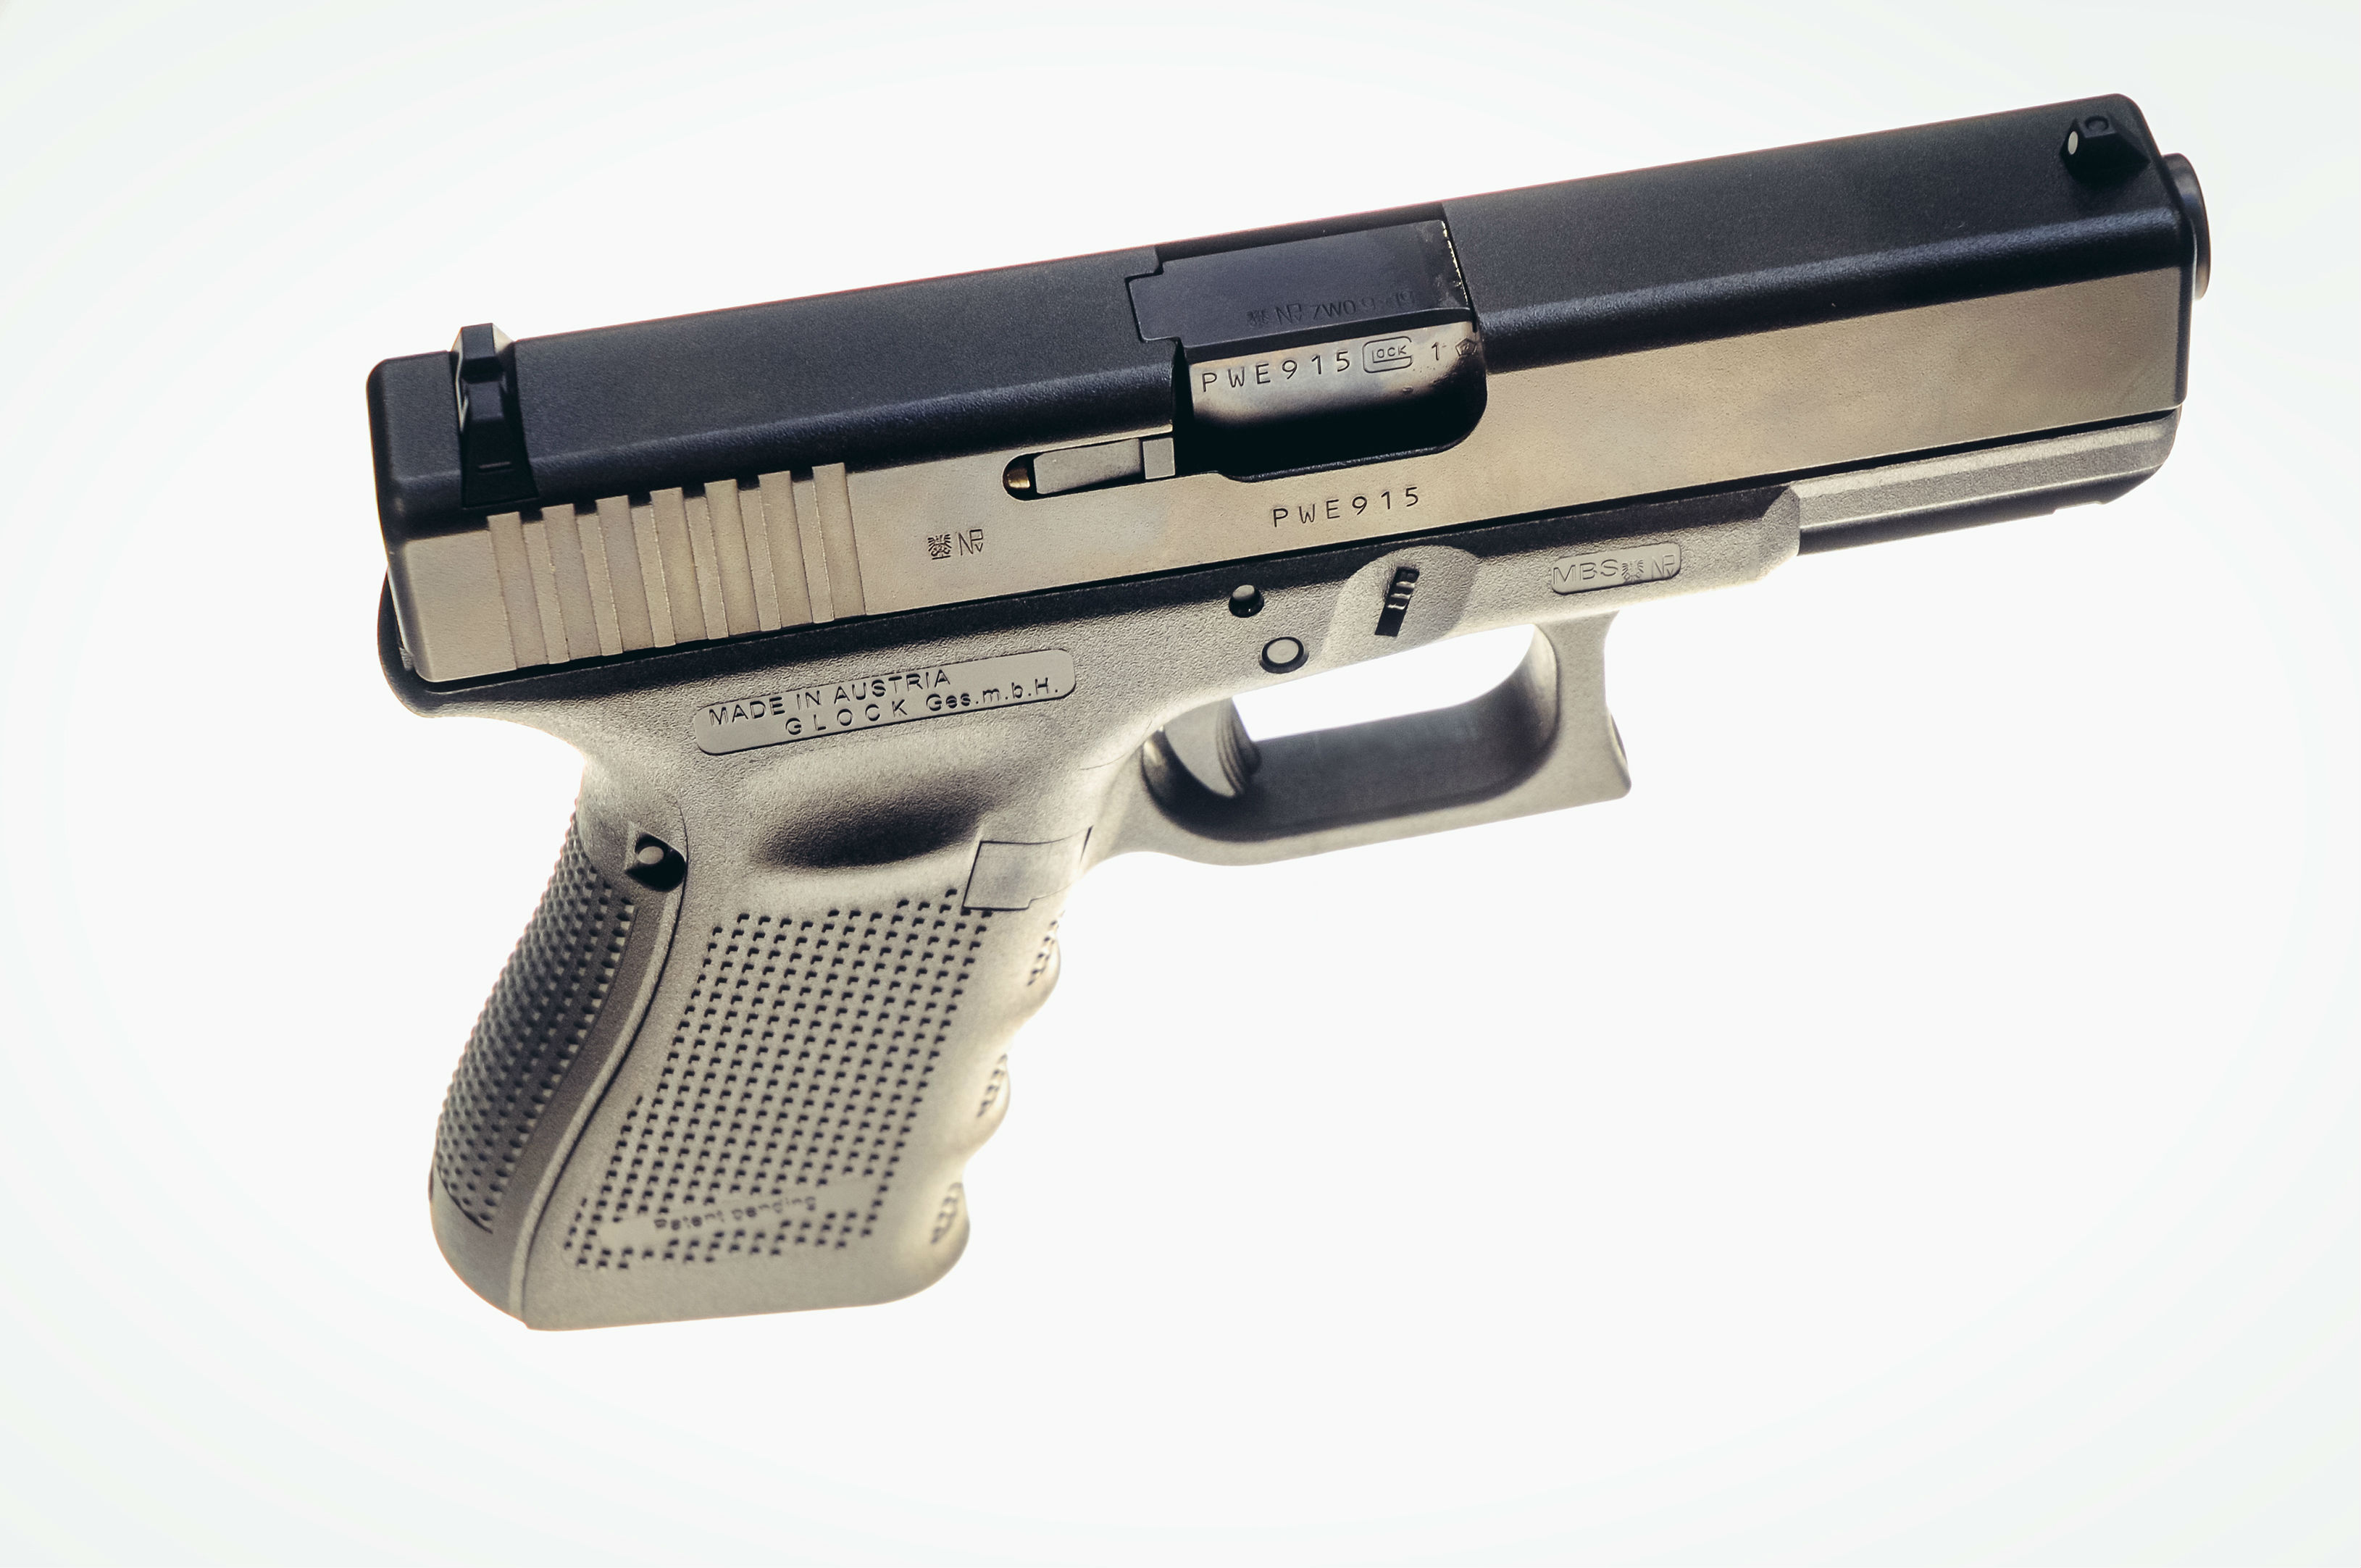 4 Reasons to Buy a Glock 19